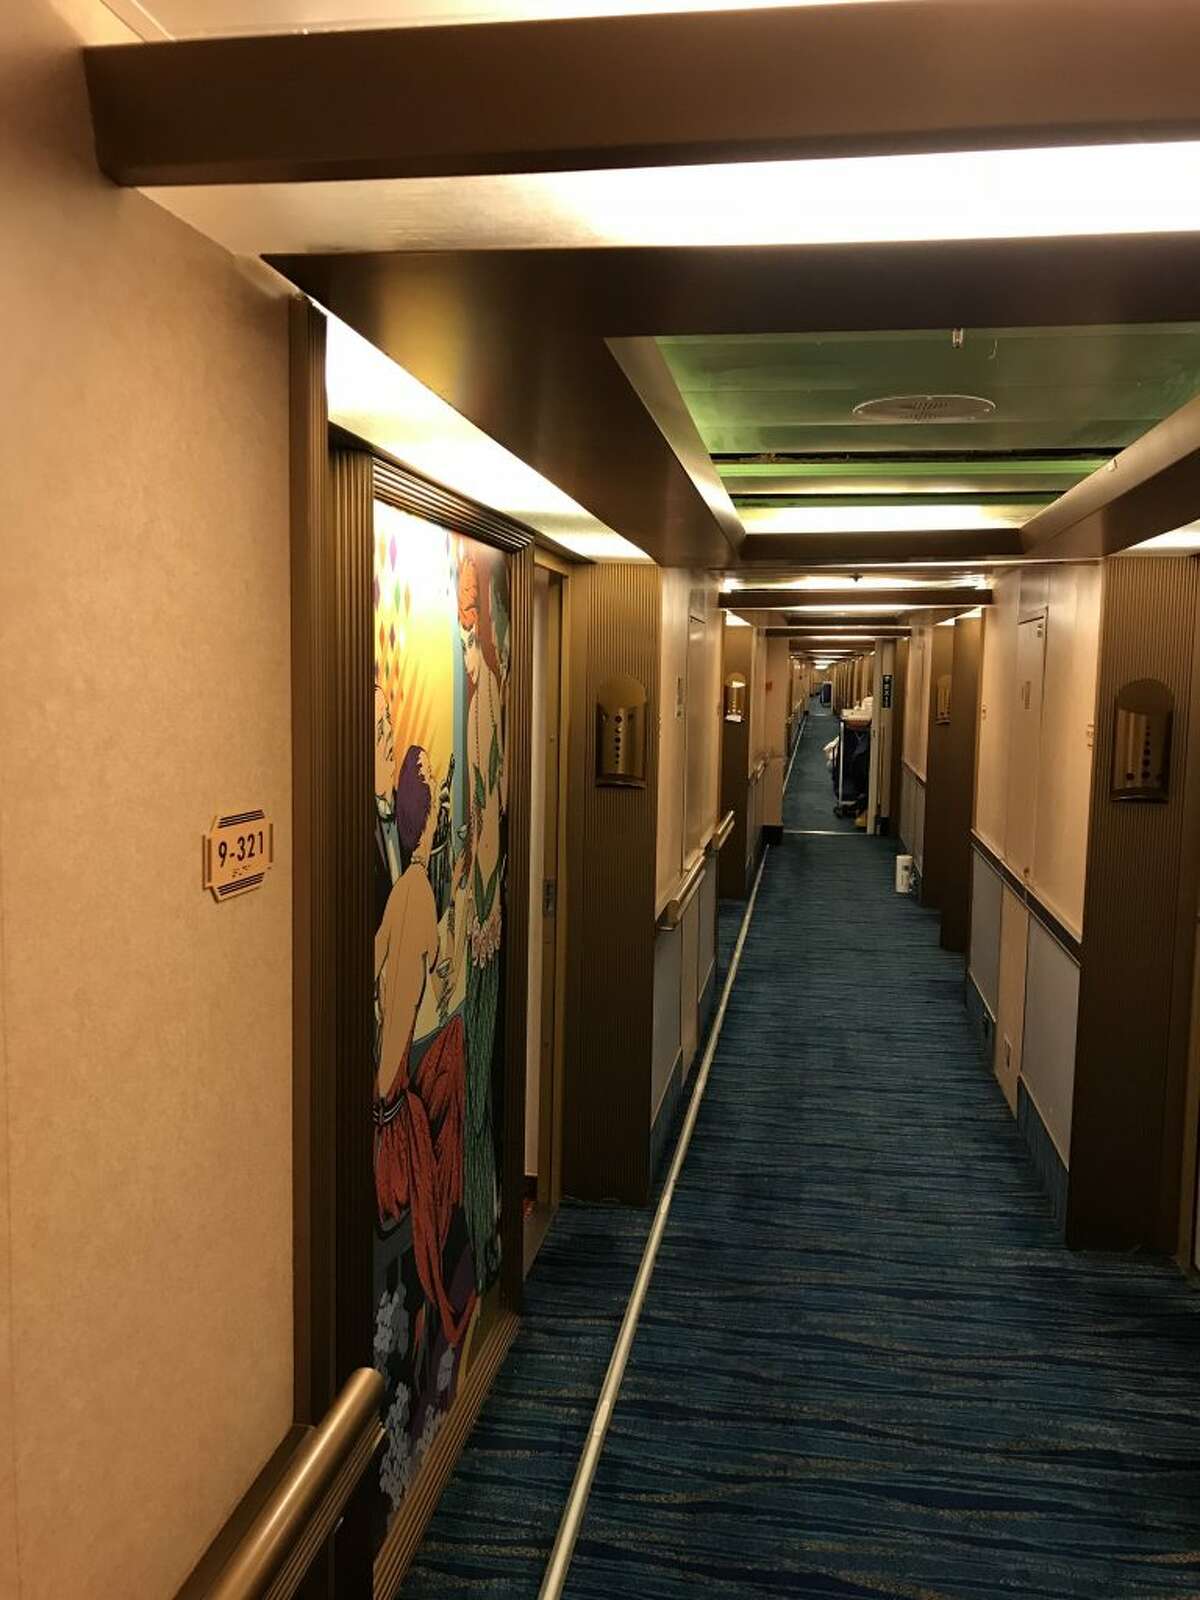 Carnival Cruise released these photos of the Carnival Dream after the water line break with the following message: "The water line break occurred at 6:00 p.m. and in six hours, our crew had replaced hall and stateroom carpeting, dried out other sections of carpeting that were damp but did not need to be replaced, and restored the 50 staterooms so that all guests could sleep in their beds that evening."